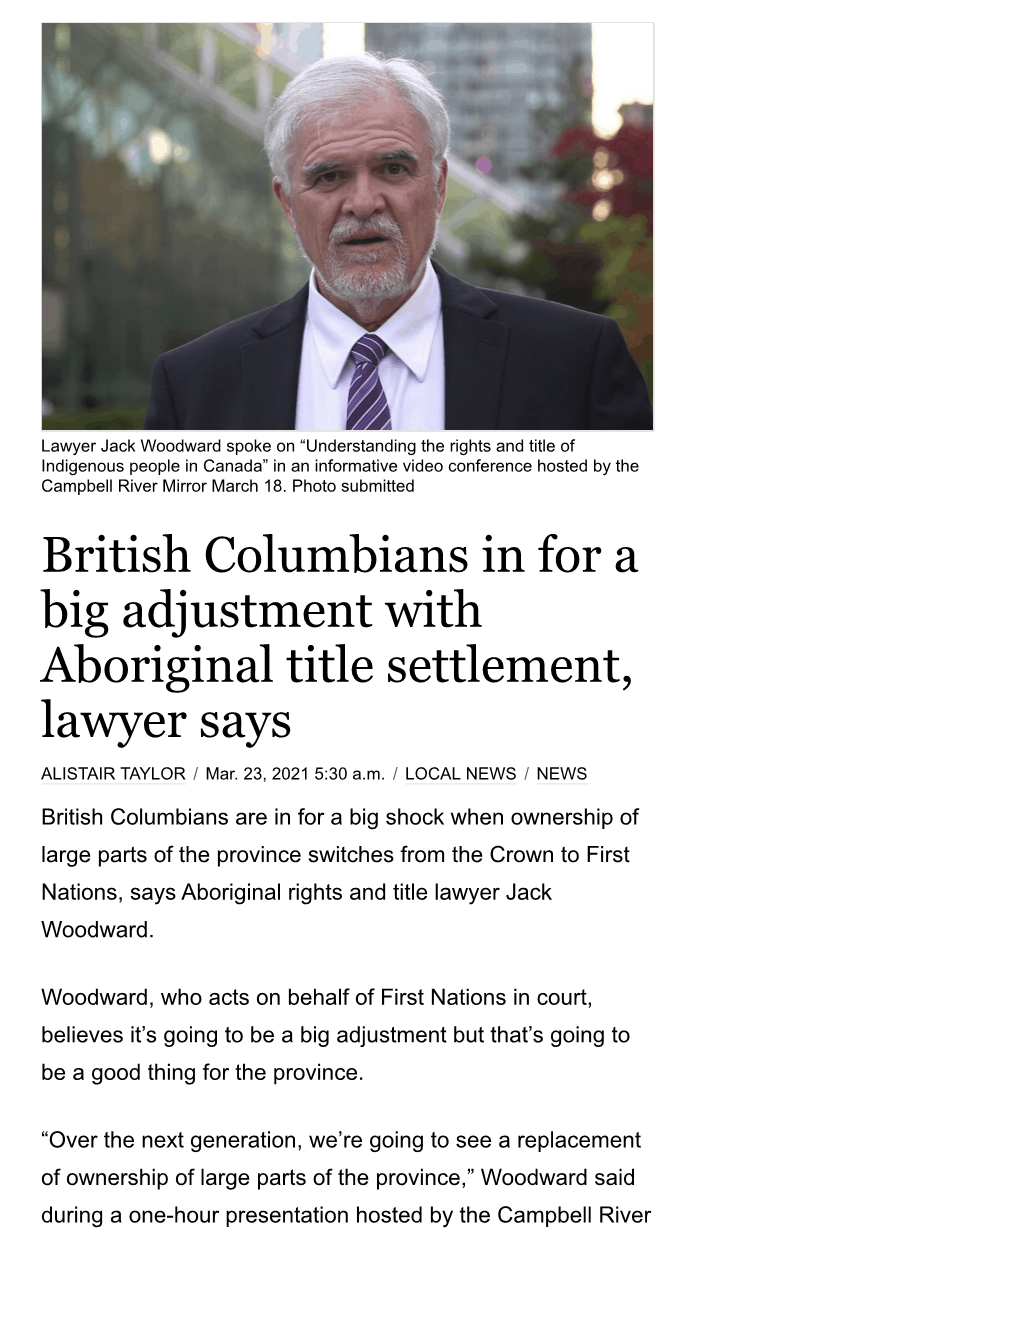 British Columbians in for a Big Adjustment with Aboriginal Title Settlement, Lawyer Says